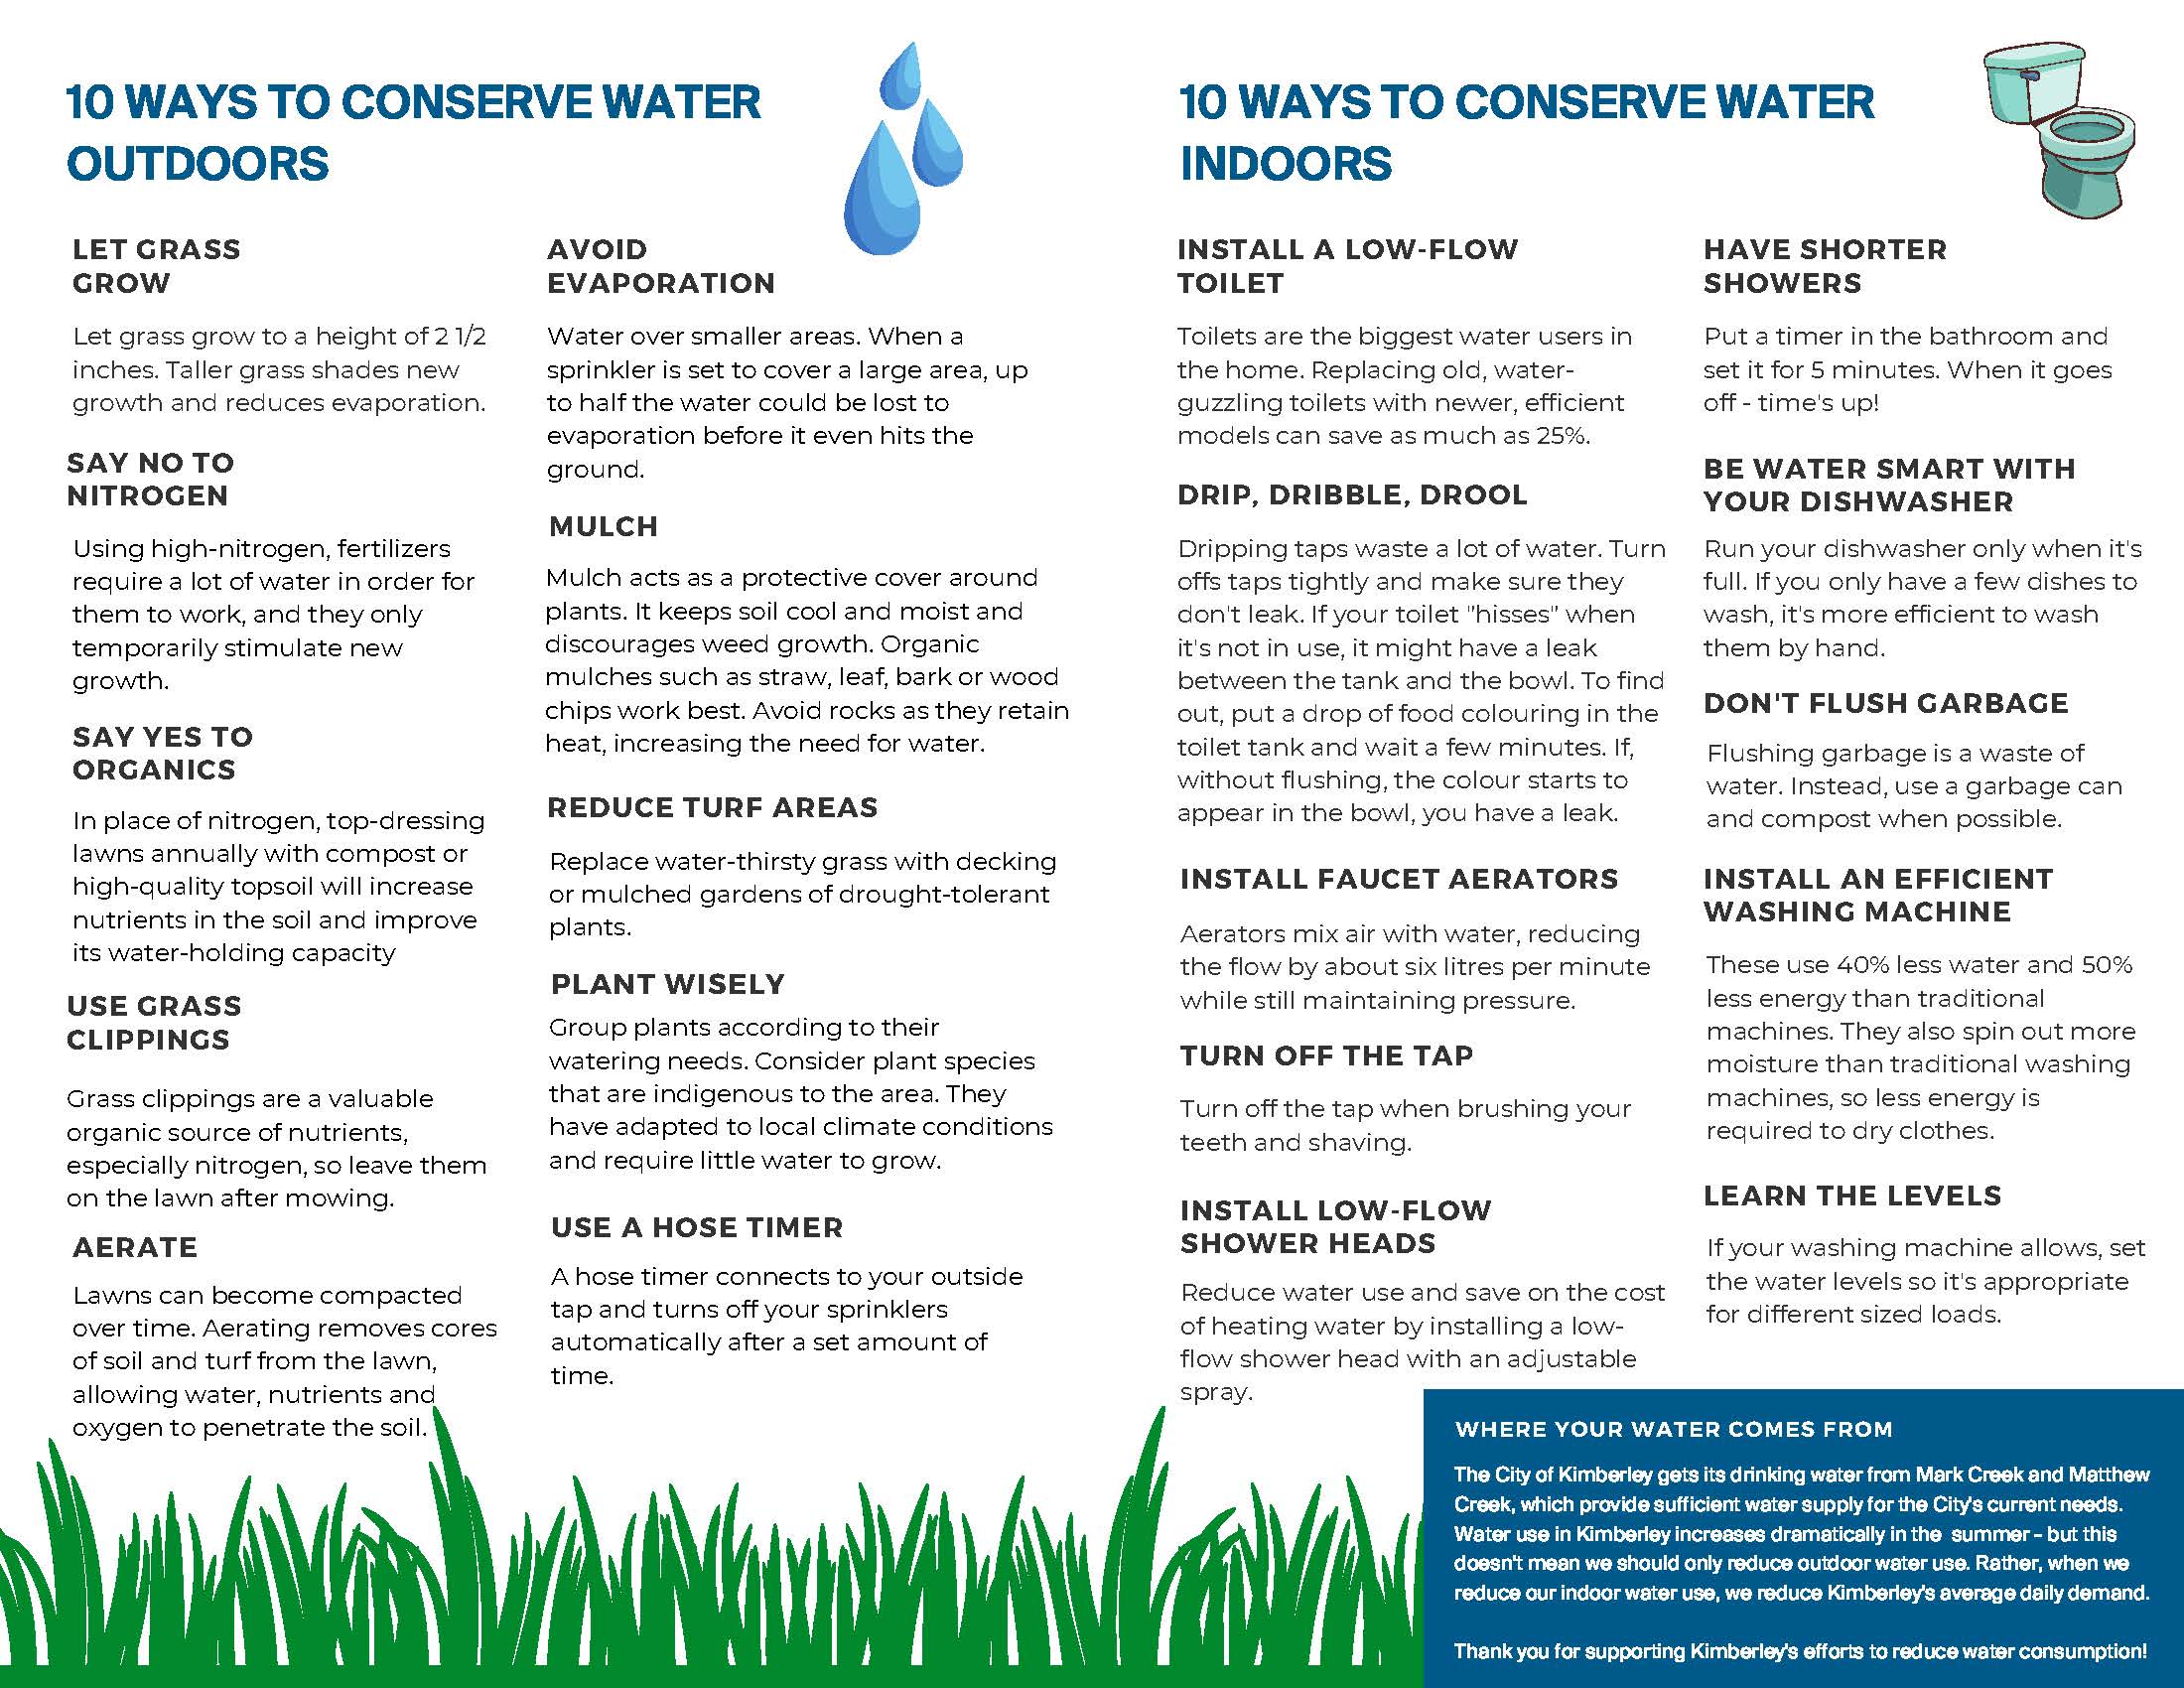 10 ways to conserve water indoors and outdoors